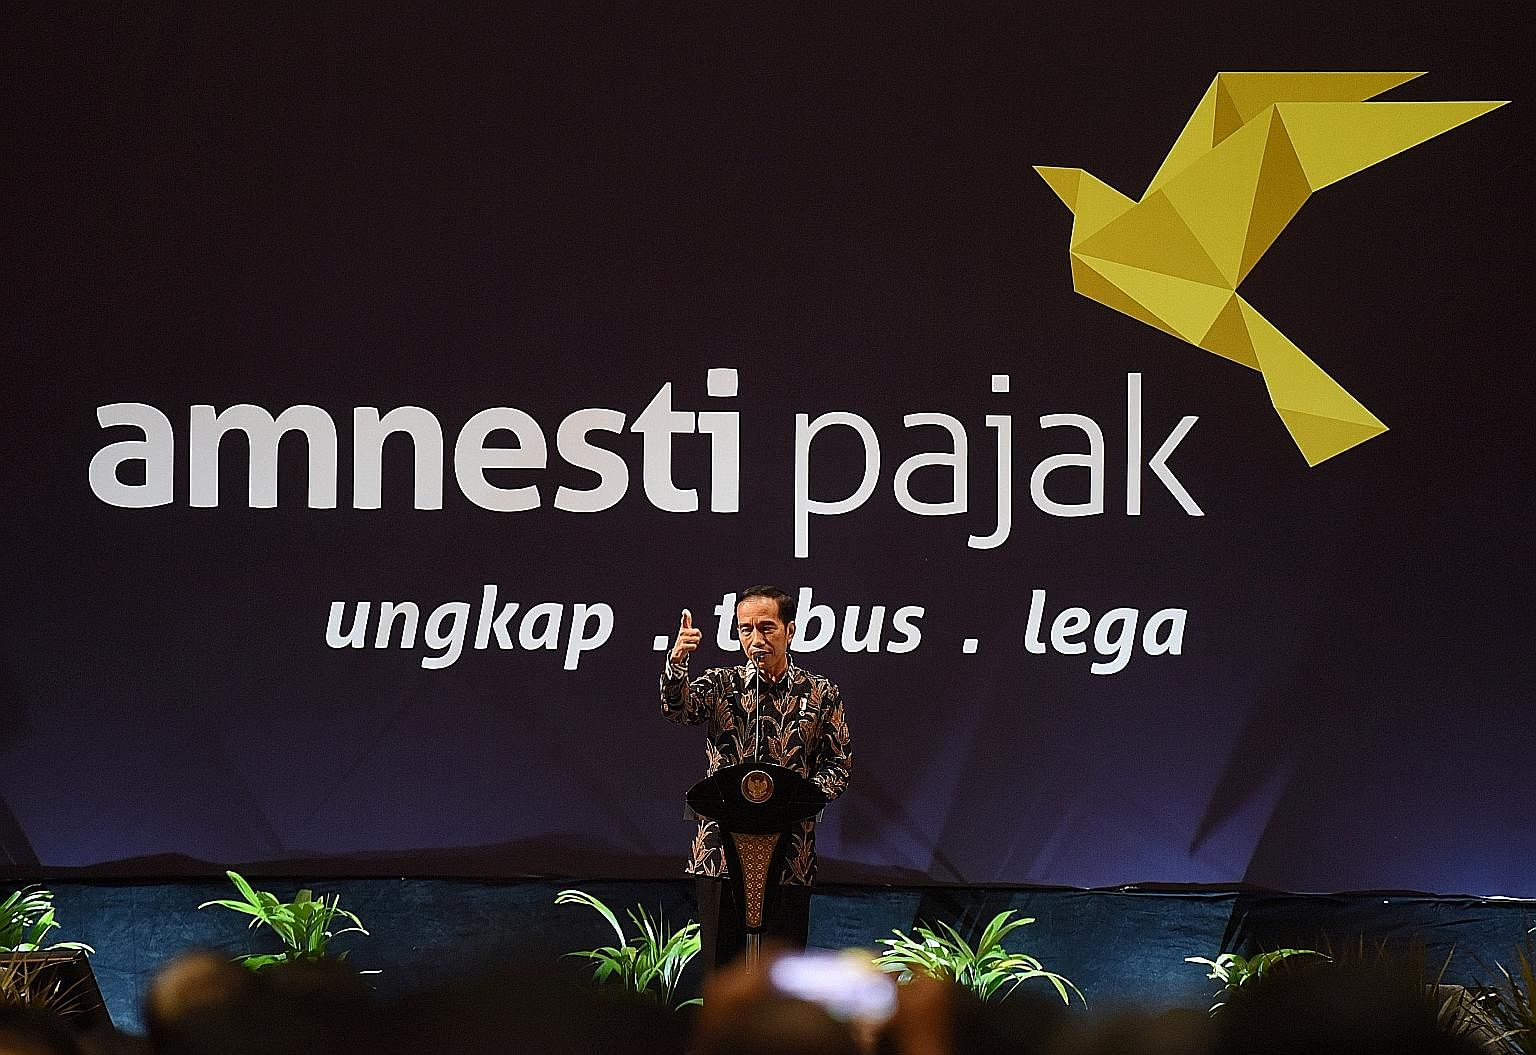 Indonesian President Joko Widodo announced a tax amnesty programme last year aimed at recovering billions of dollars lost to widespread tax evasion.